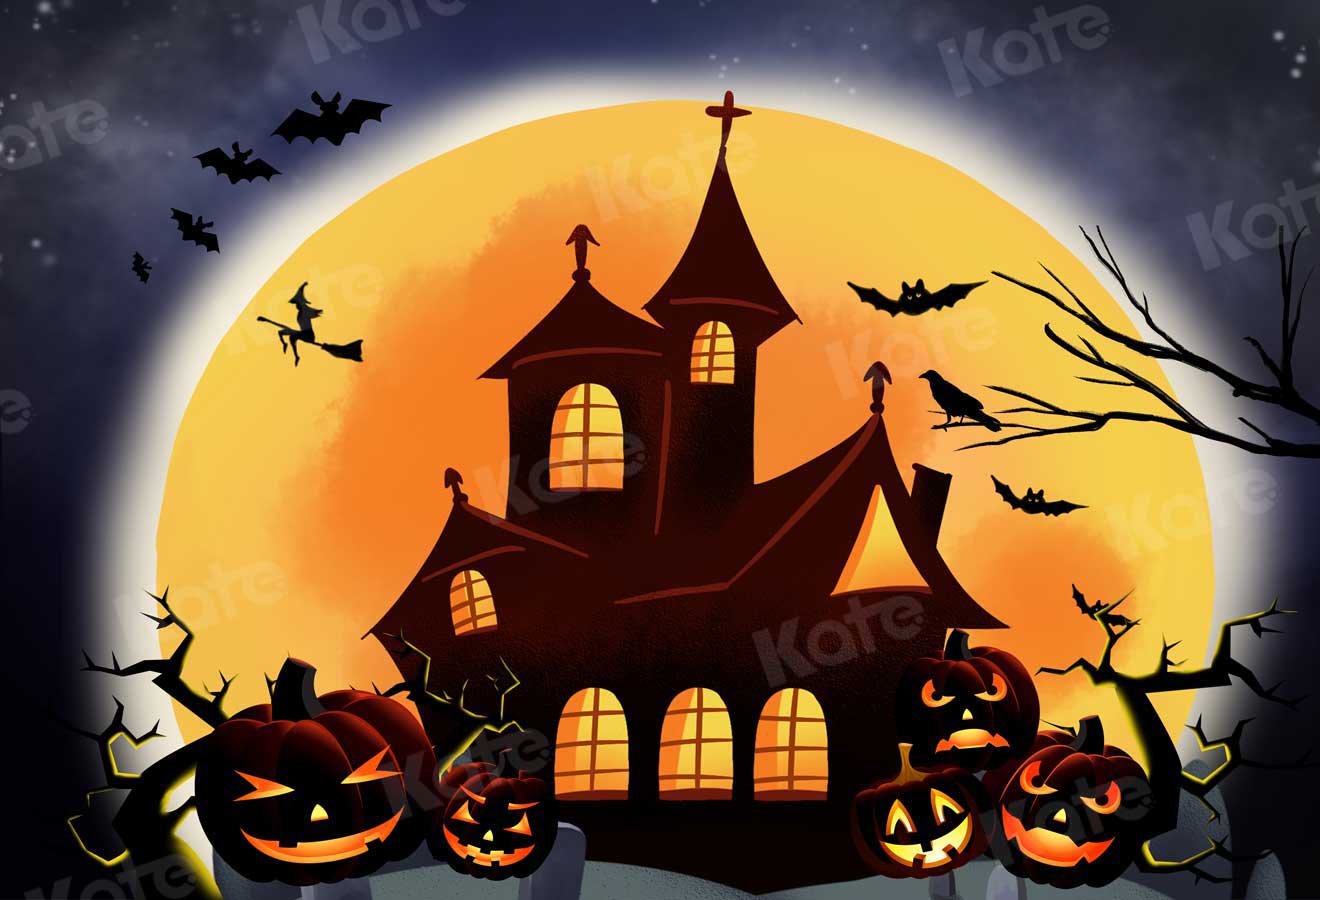 Kate Halloween Backdrop Pumpkins Witch House Designed by Chain Photography